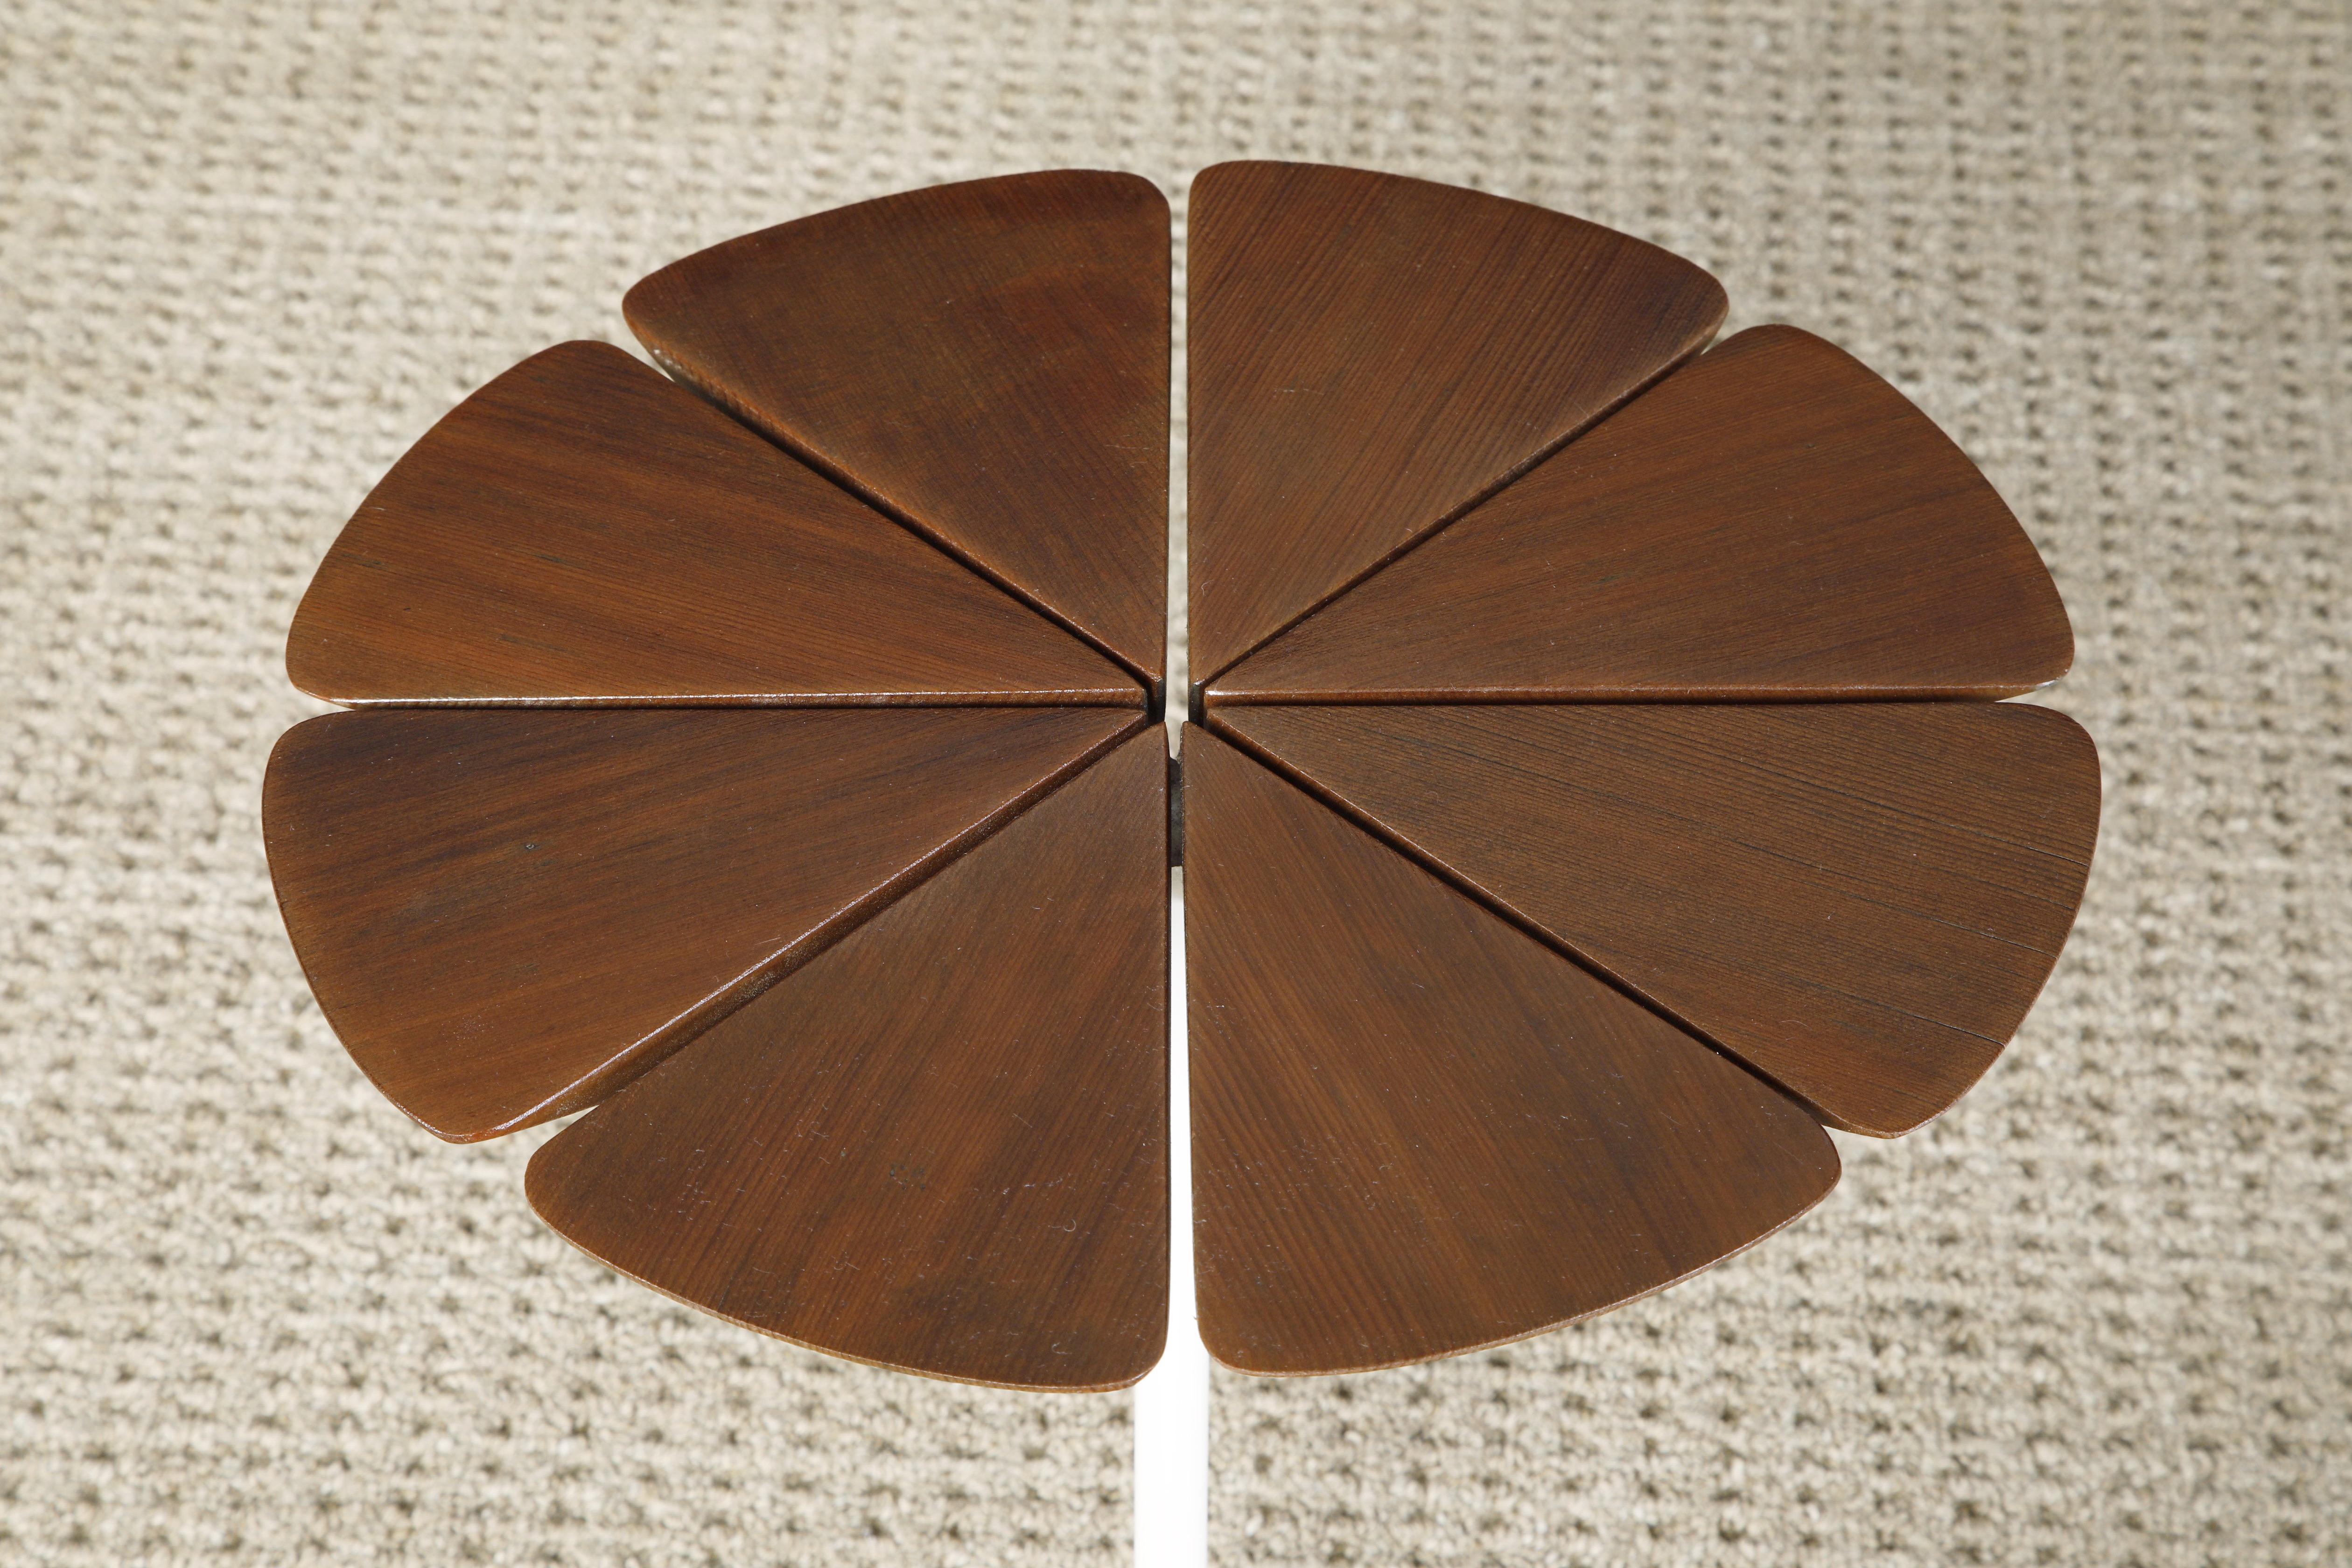 Mid-20th Century 'Petal' Drinks / Side Table by Richard Schultz for Knoll Associates, Signed For Sale